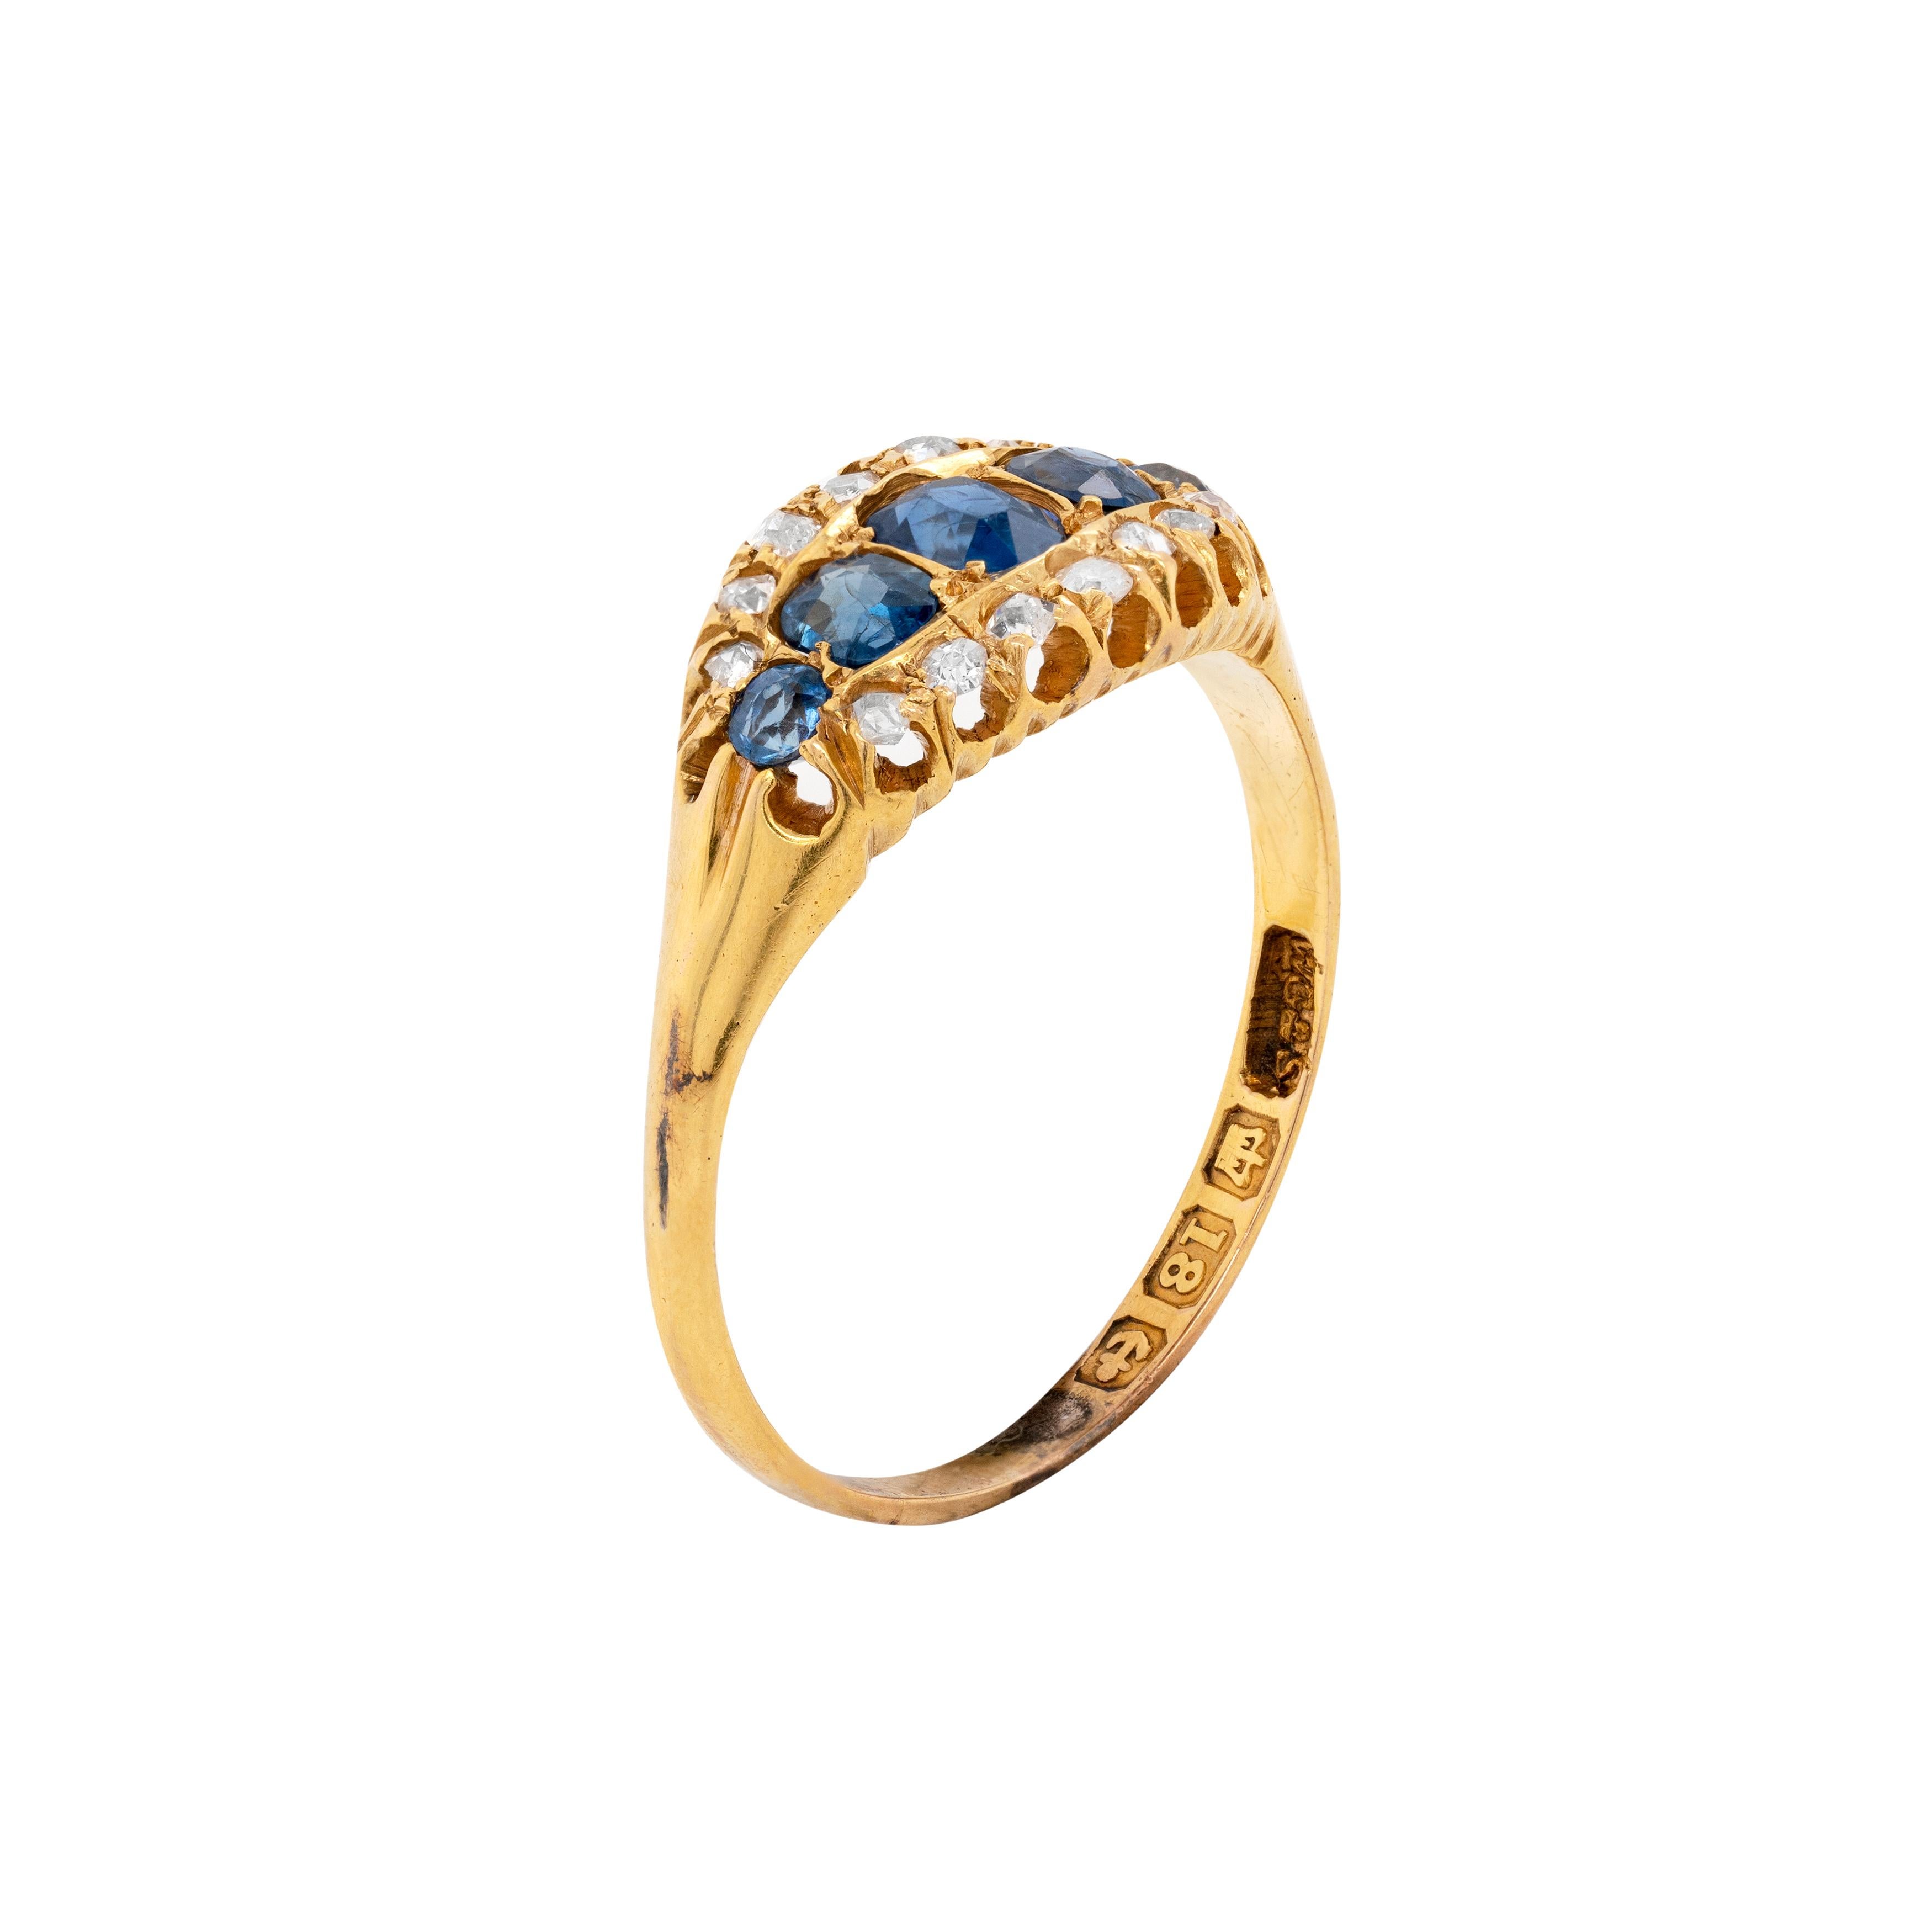 This original 18 carat yellow gold antique ring, dating back to circa 1890's, features a meticulously handcrafted fluted gallery that exudes great finesse and Late Victorian flair indicative of its era. The piece is horizontally set with 5 well